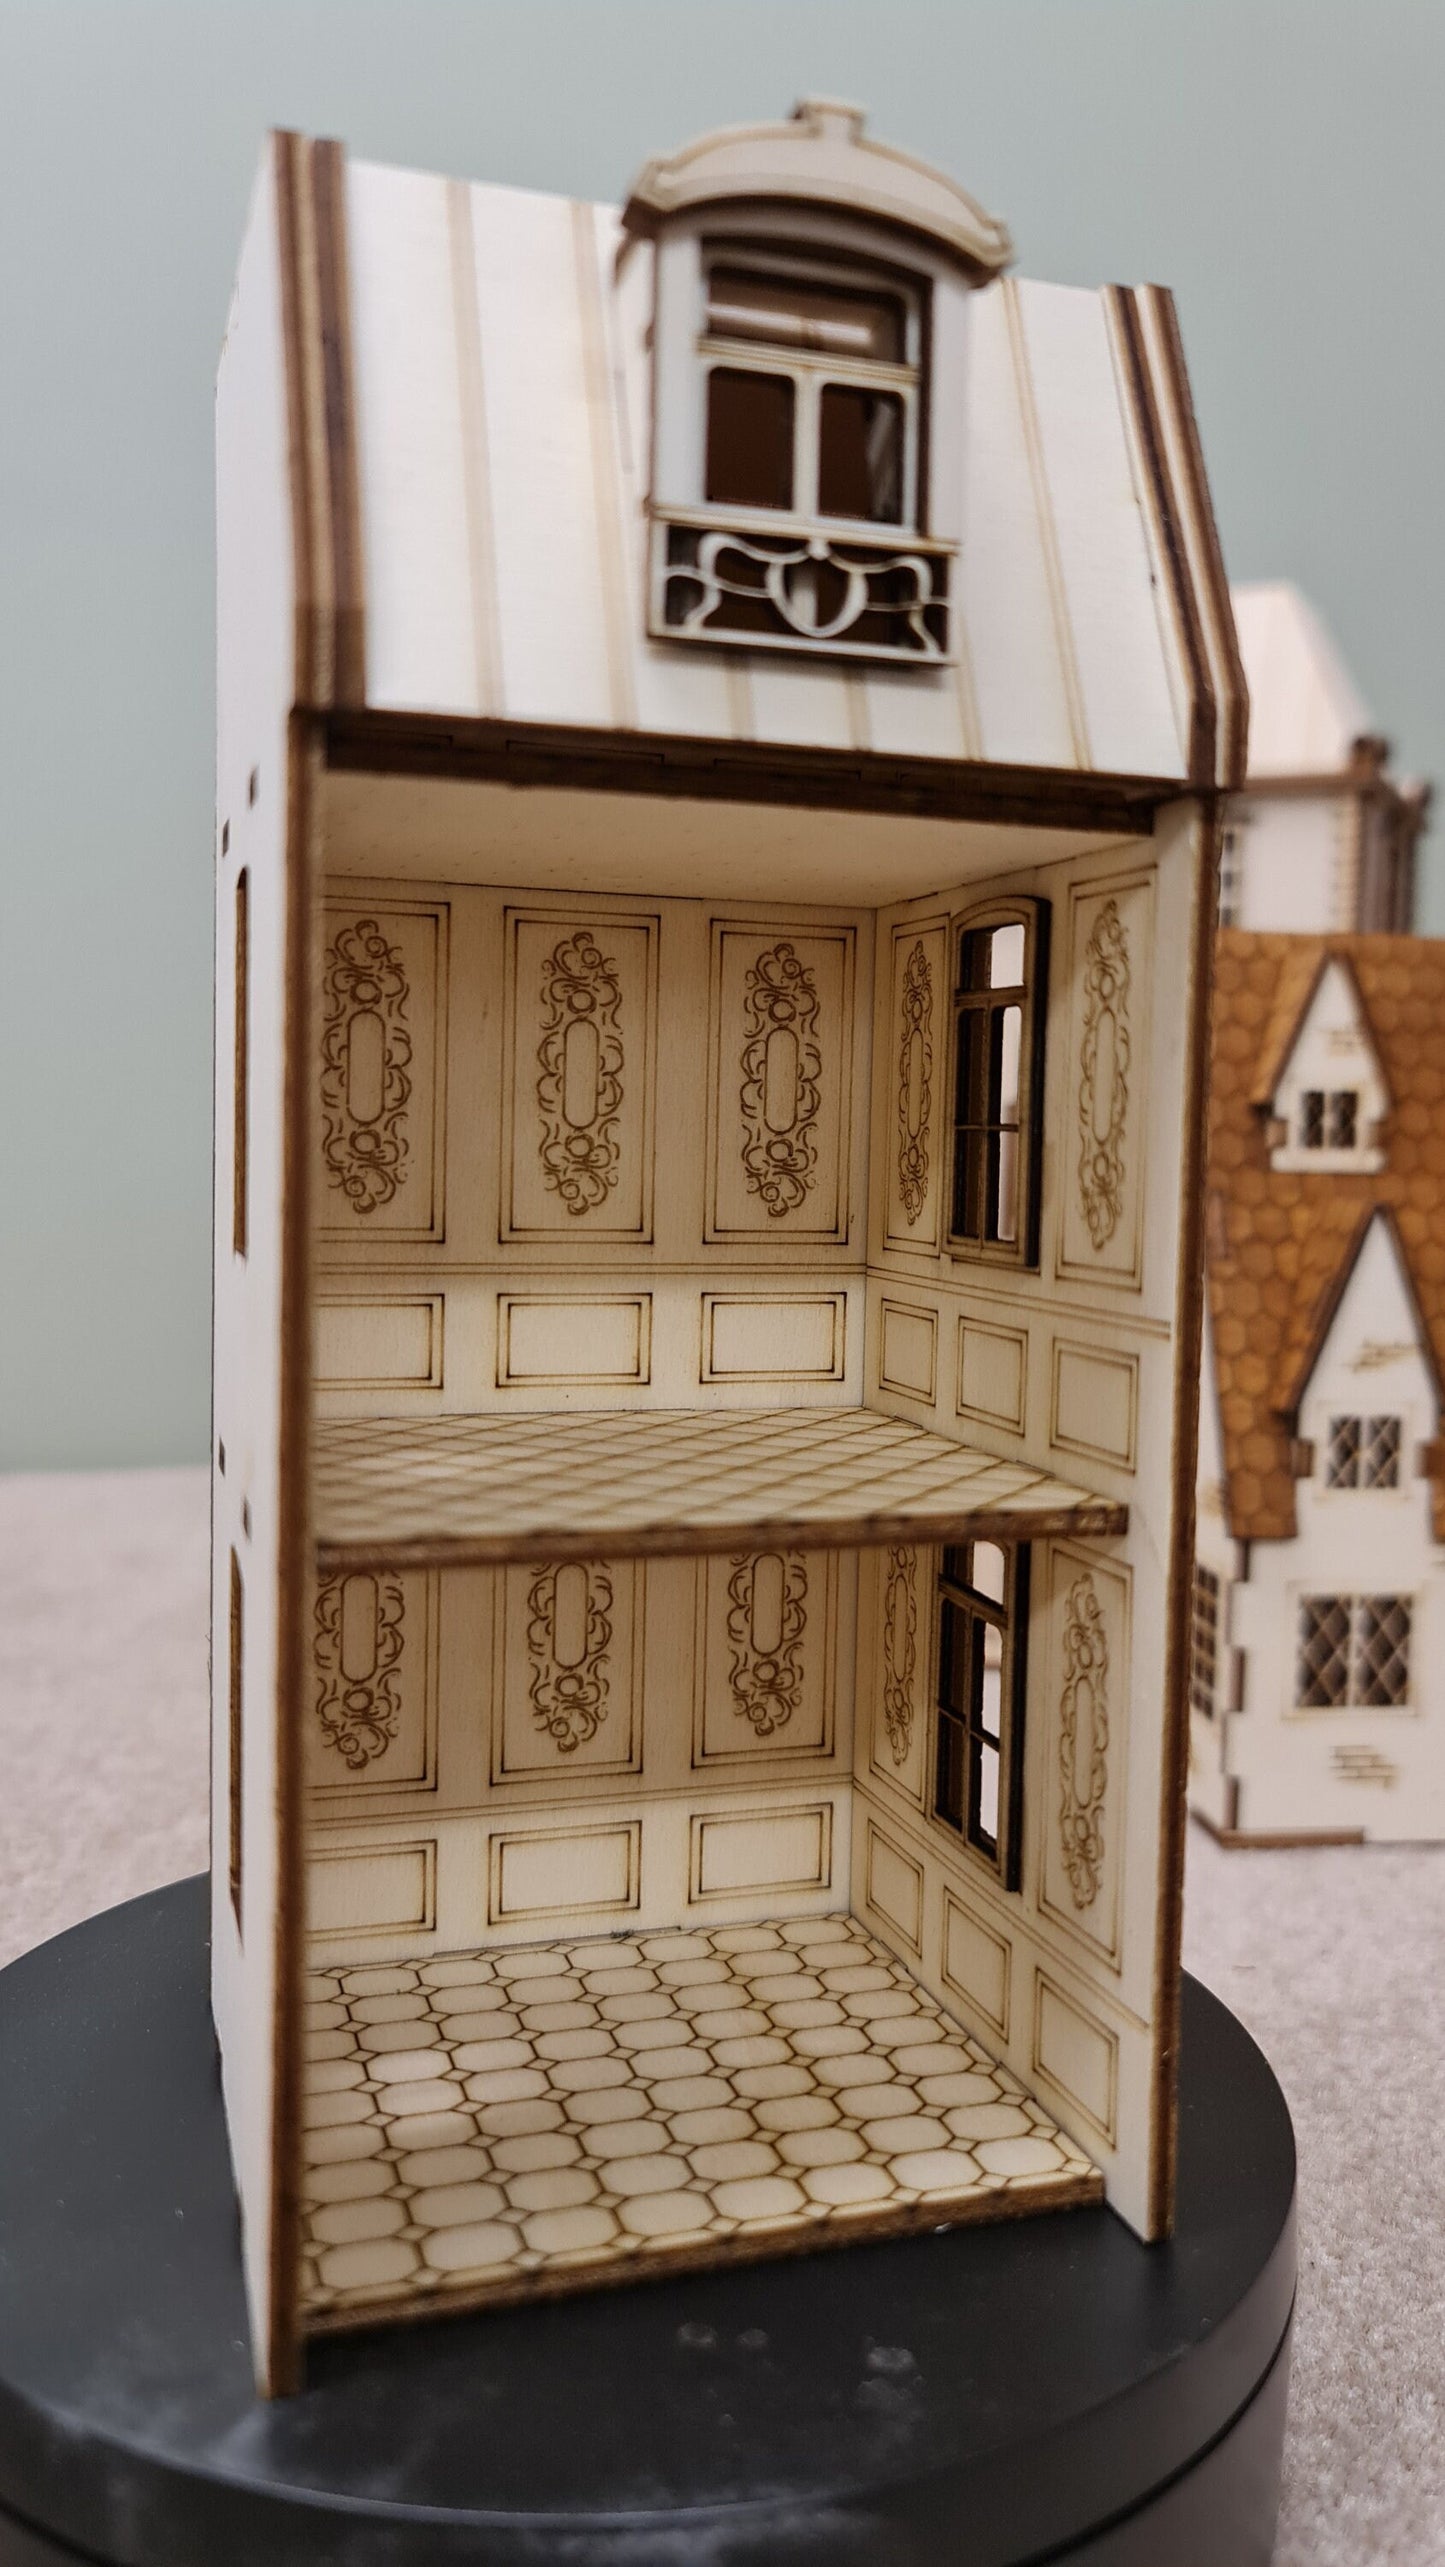 "The French Boutique", 1;24th scale